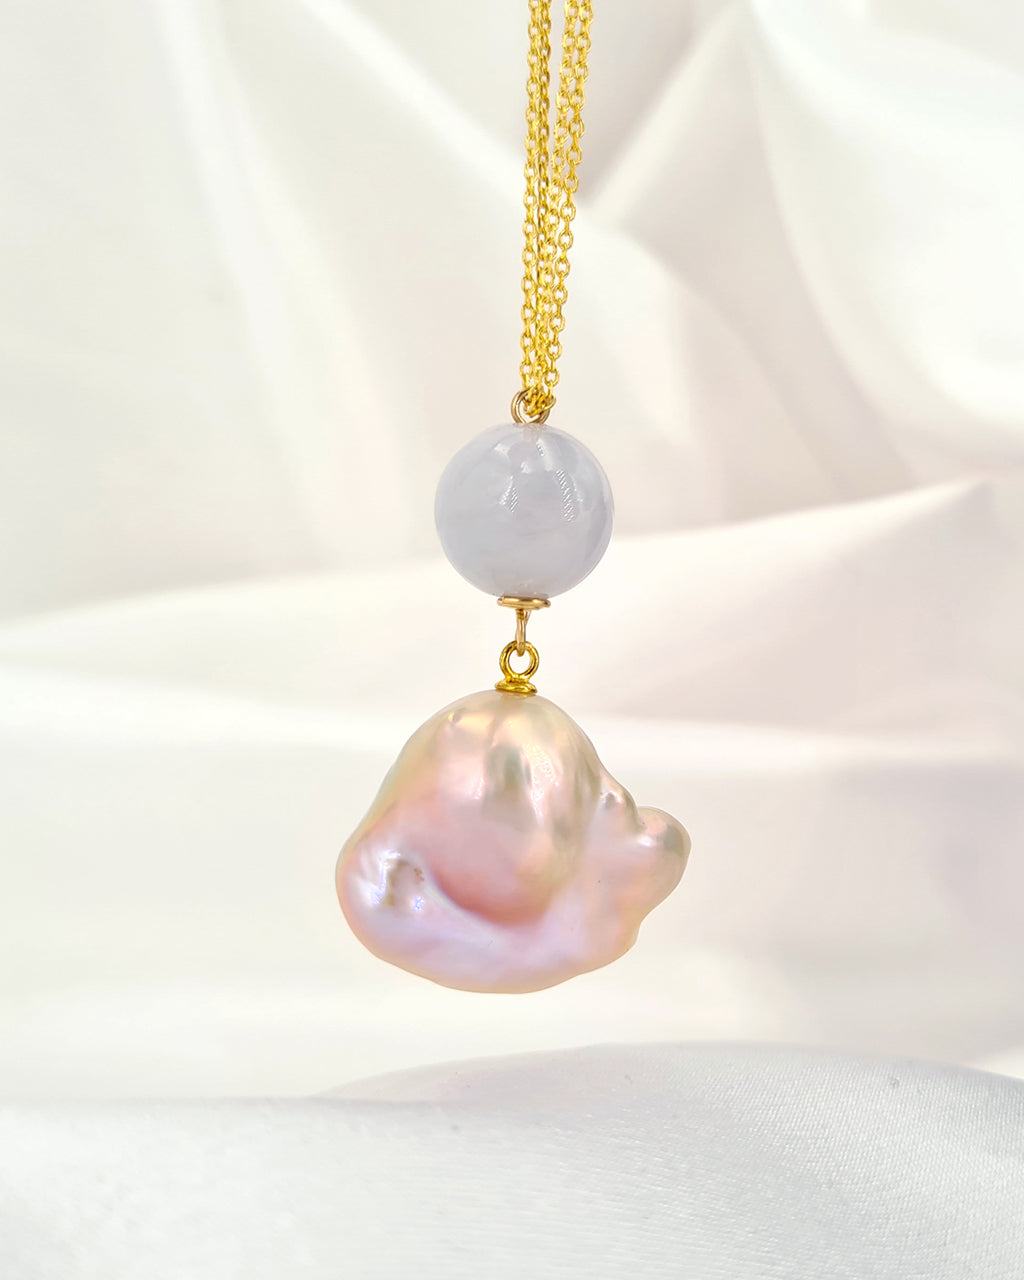 Pink Baroque Pearl & Jade Gold Necklace - Minimalist & Elegant - Wedding Bridal Jewelry for Brides and Bridesmaids | Singapore